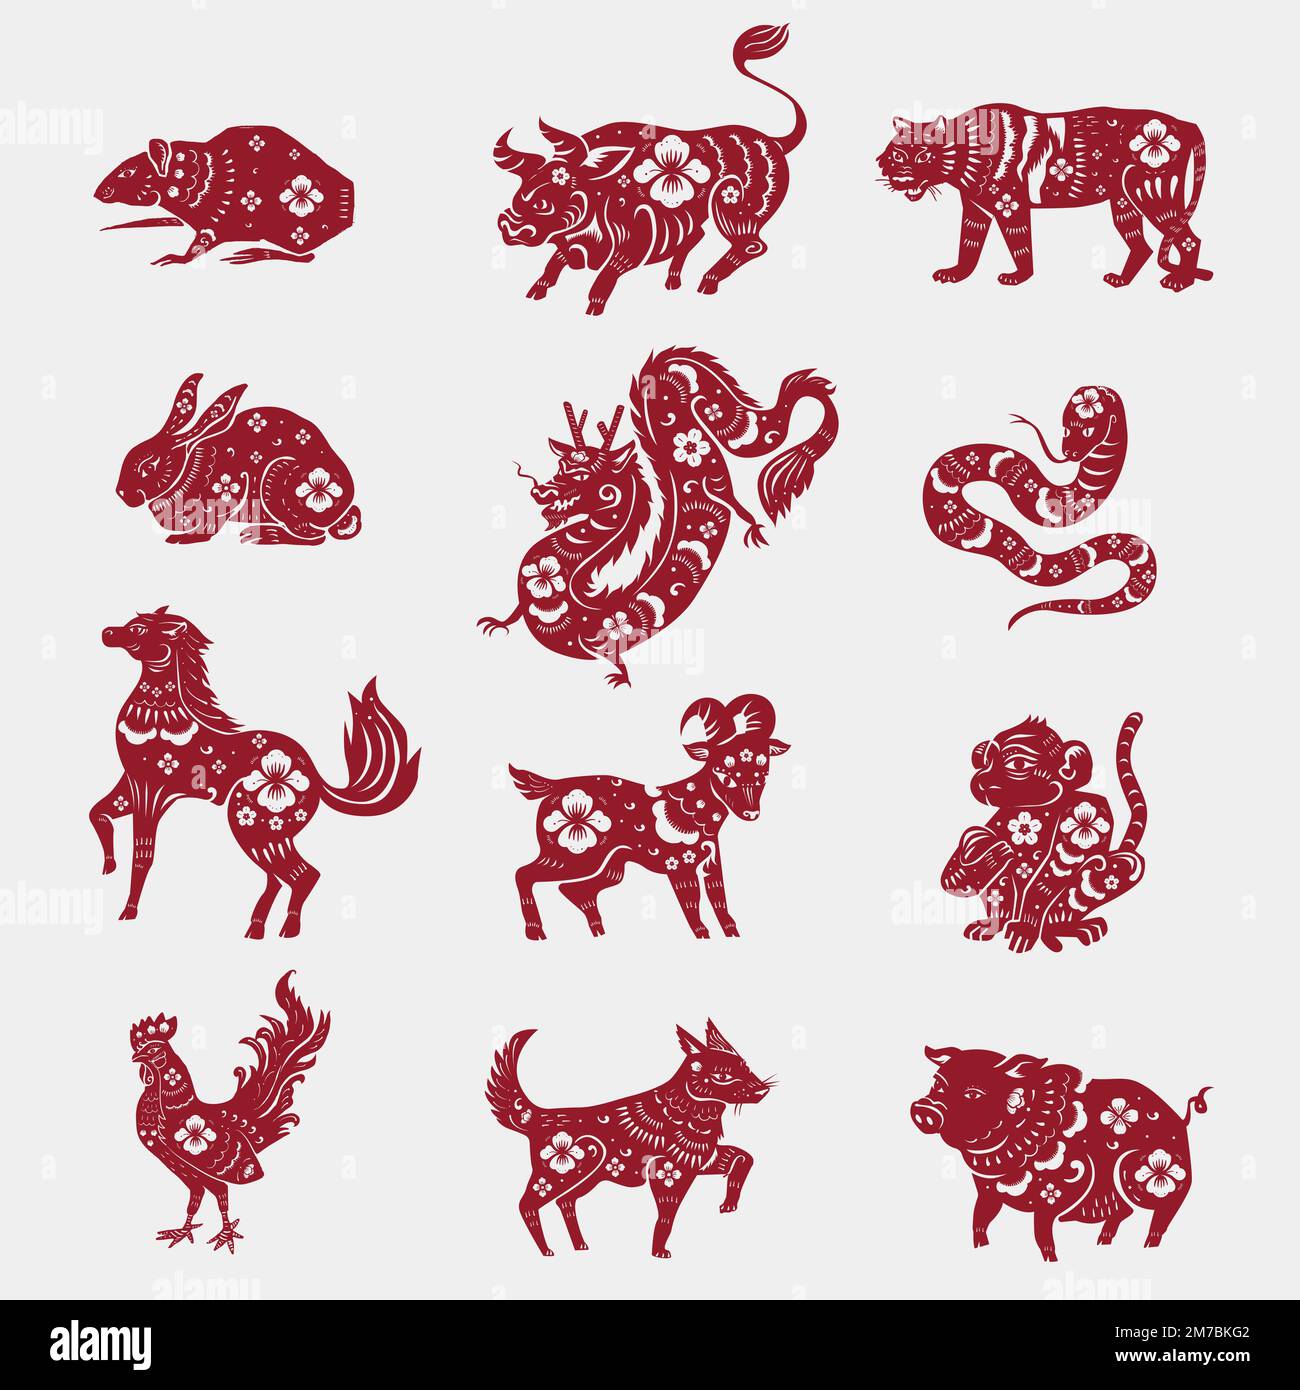 Chinese zodiac animal collection. Twelve asian new year red character logos  set isolated on white background. Vector illustration of astrology calendar  horoscope symbols Stock Vector